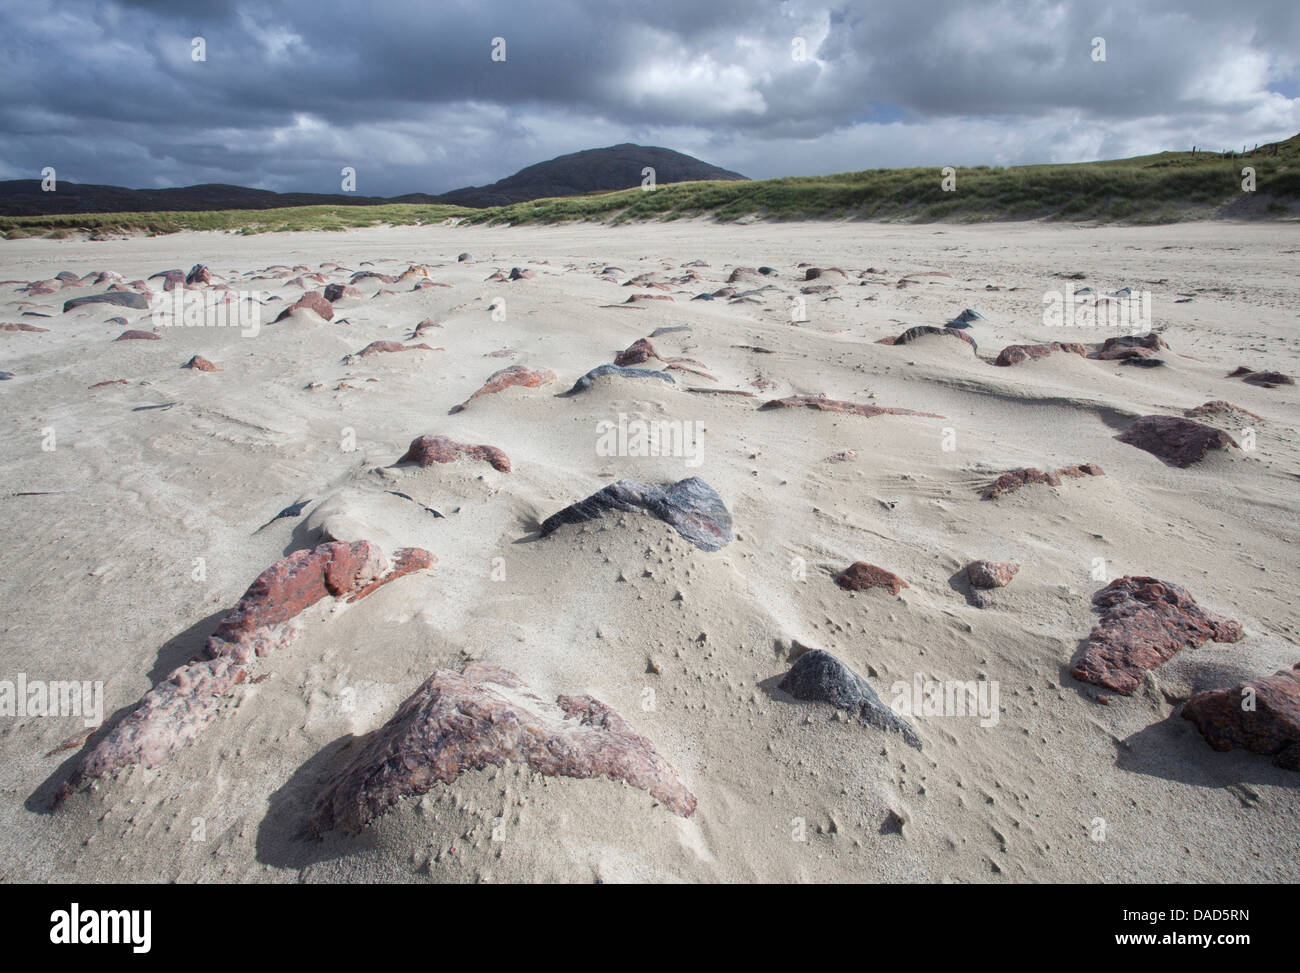 Uig Beach with patterns in the foreground created by wind blowing the sand, Isle of Lewis, Outer Hebrides, Scotland, UK Stock Photo